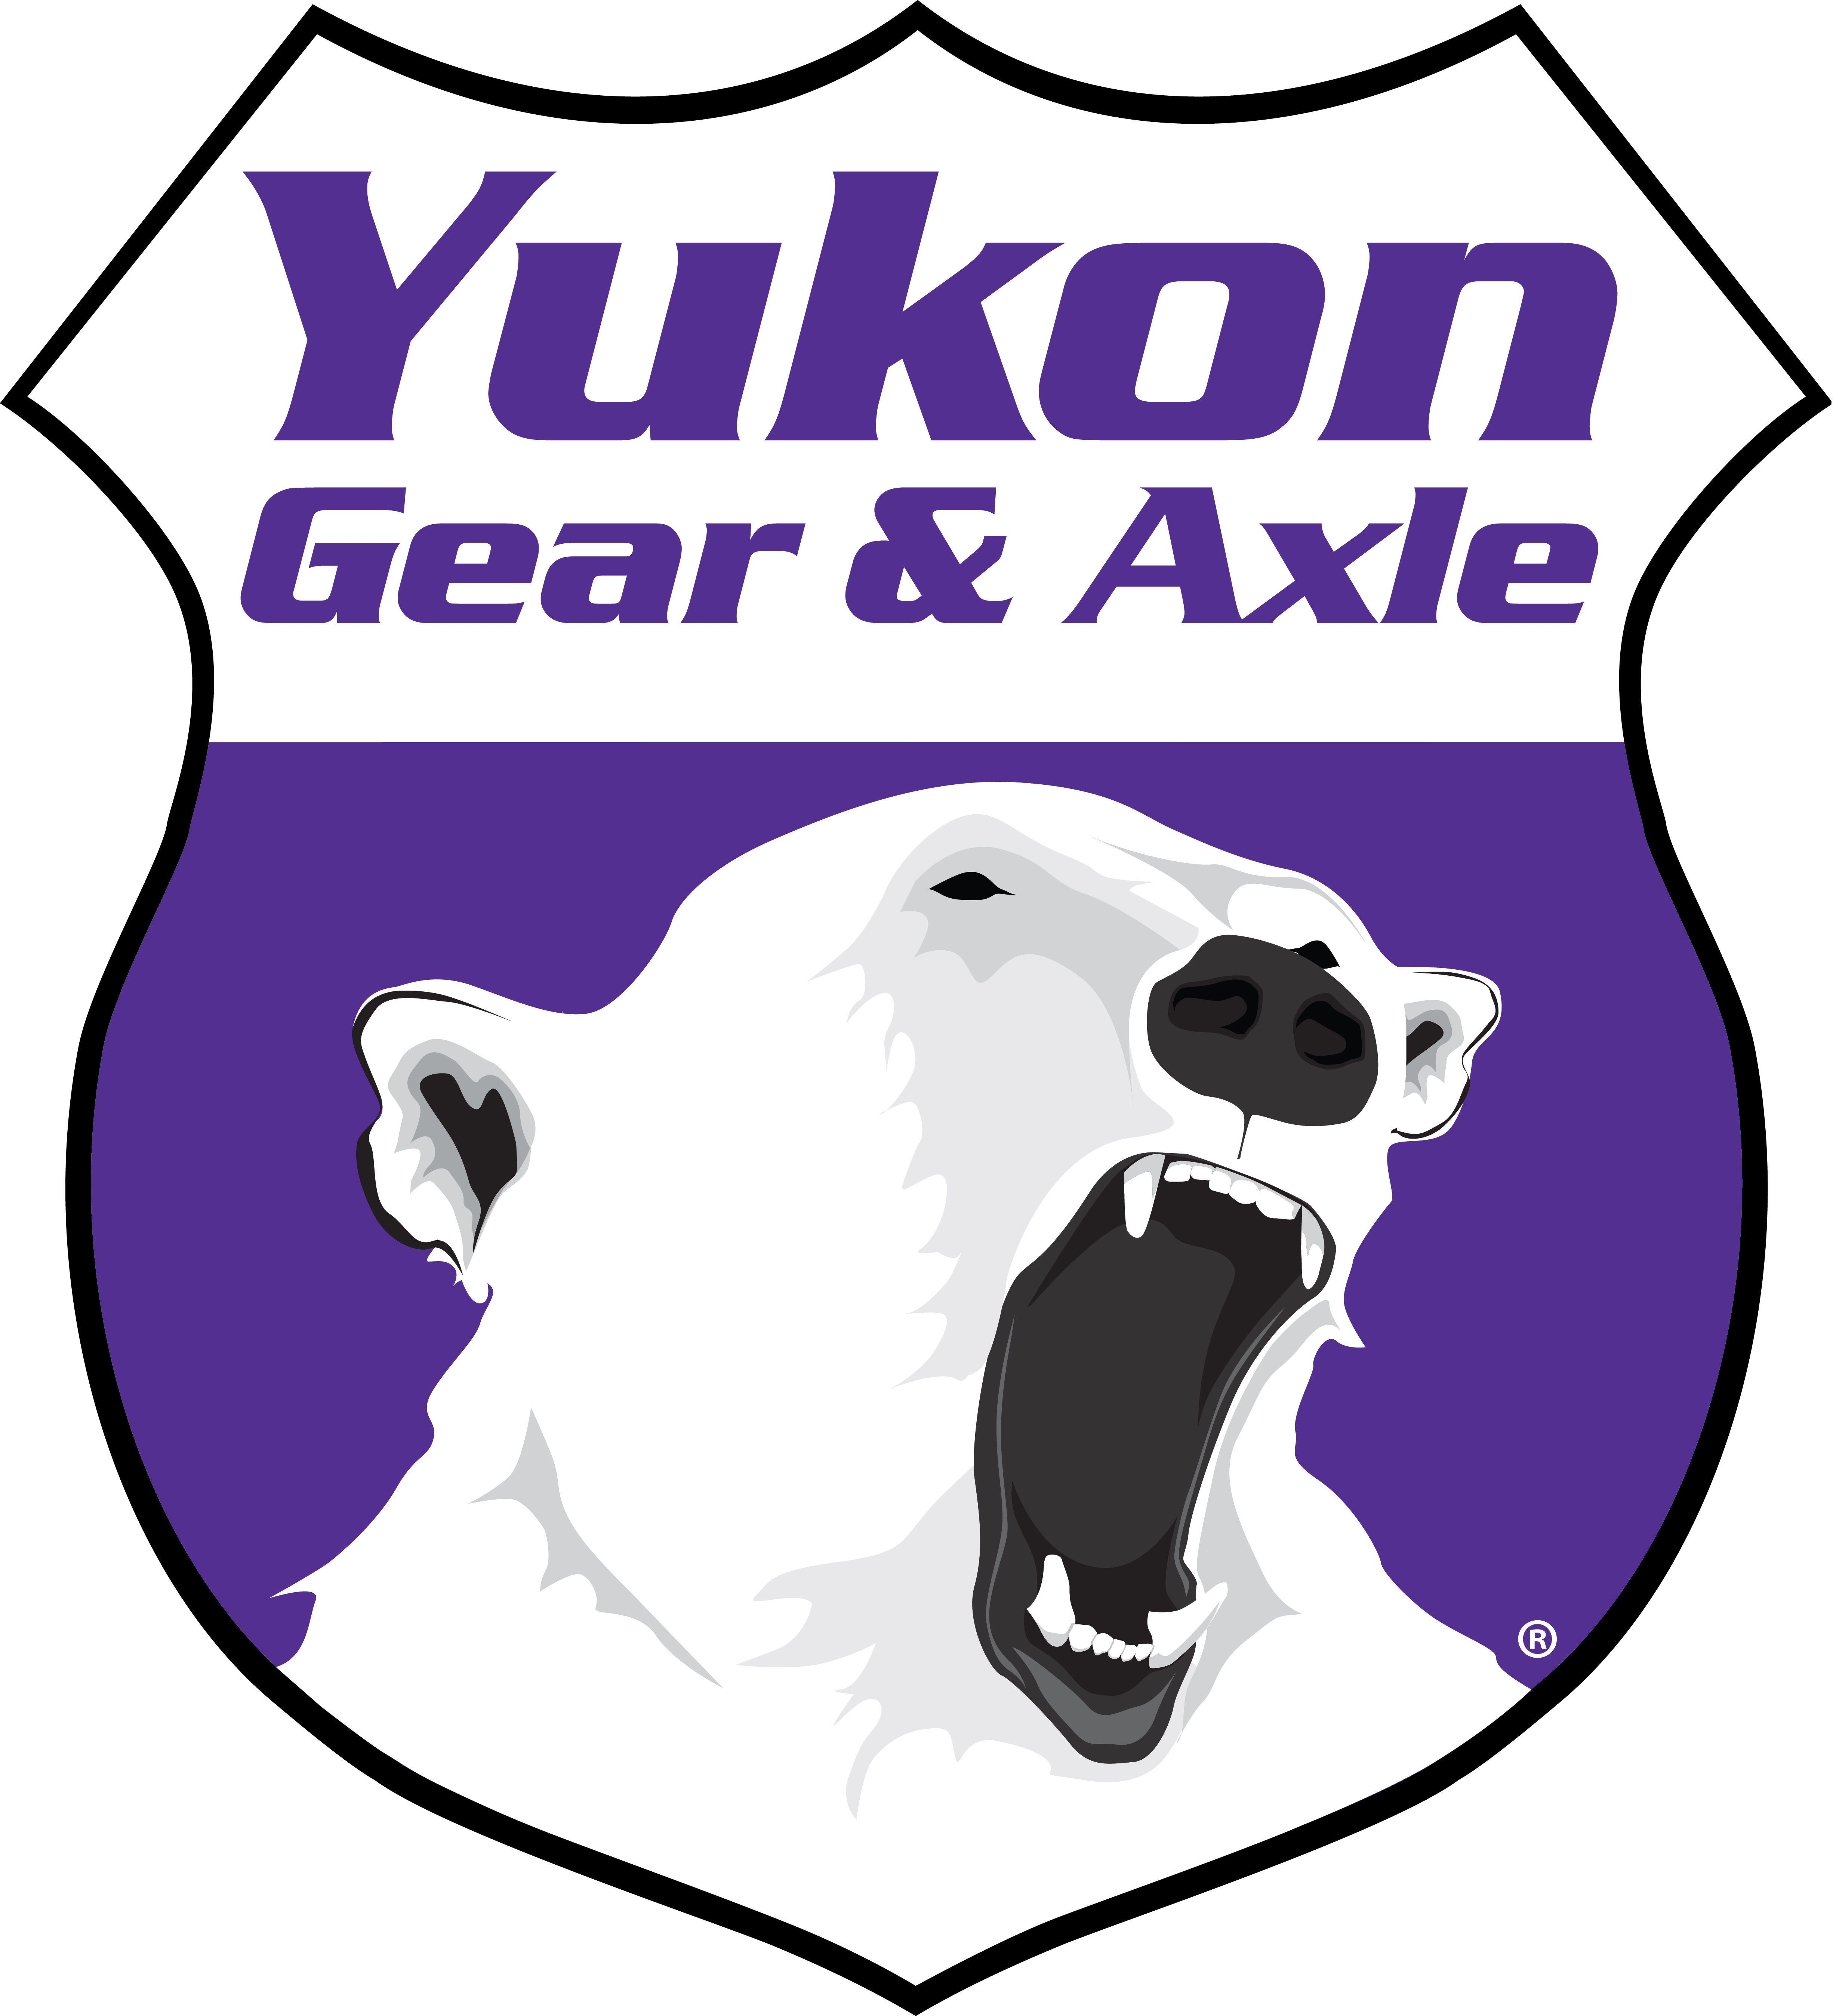 Yukon Bearing install kit for '98 and newer 10.5" GM 14 bolt truck differential 